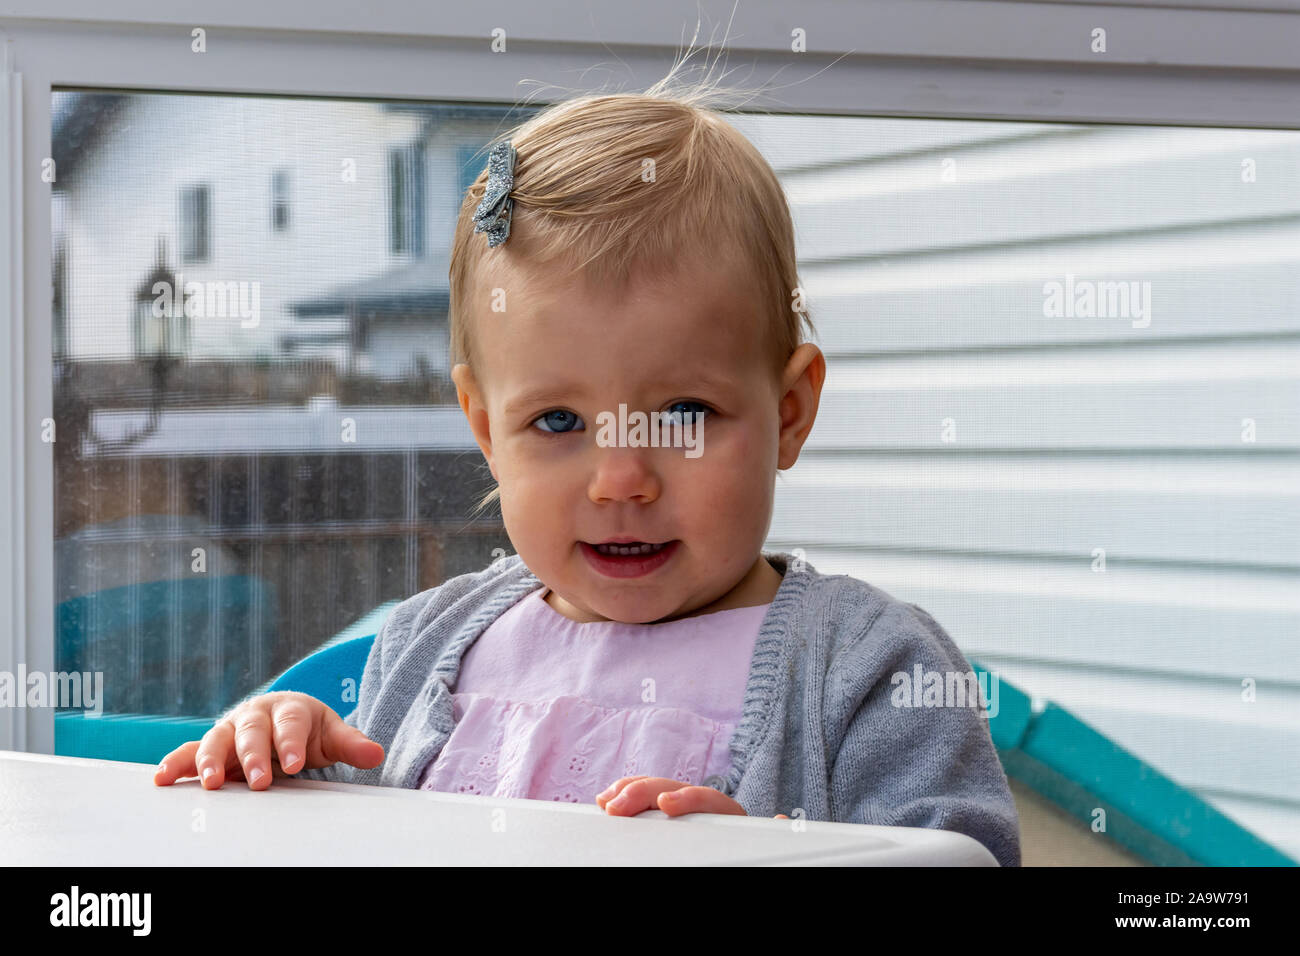 Blue eyed, blonde little girl with a cute, innocent look, close up. Stock Photo